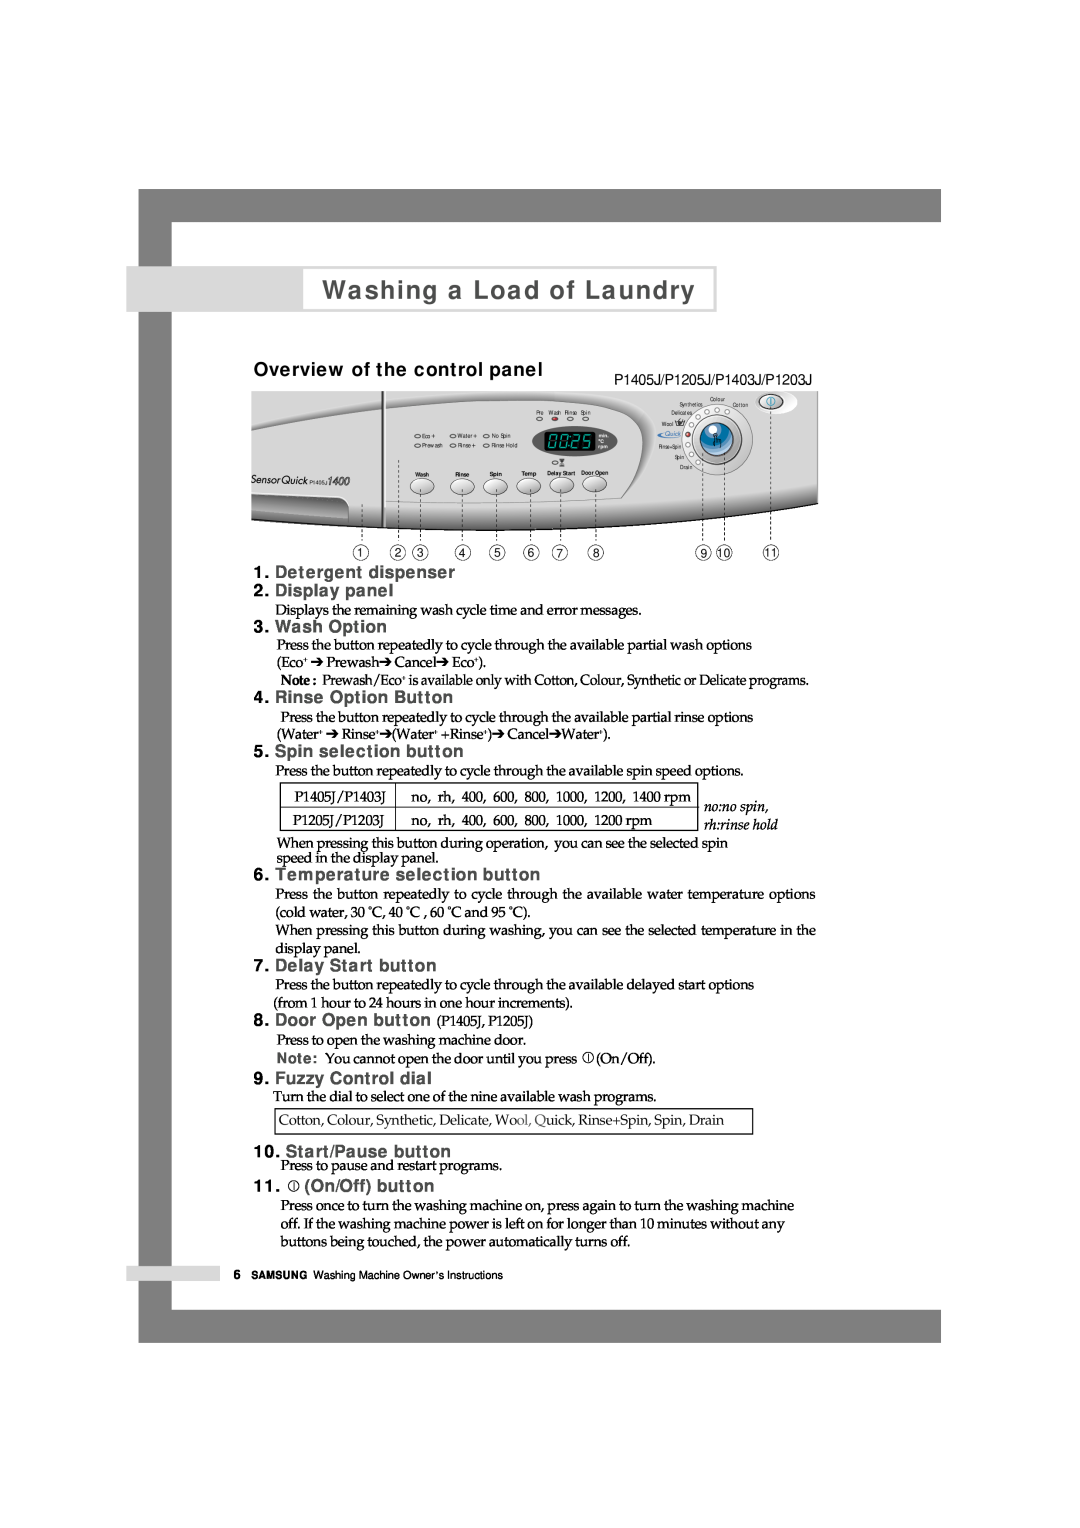 Samsung P805J Washing a Load of Laundry, Overview of the control panel, Detergent dispenser 2. Display panel, Wash Option 